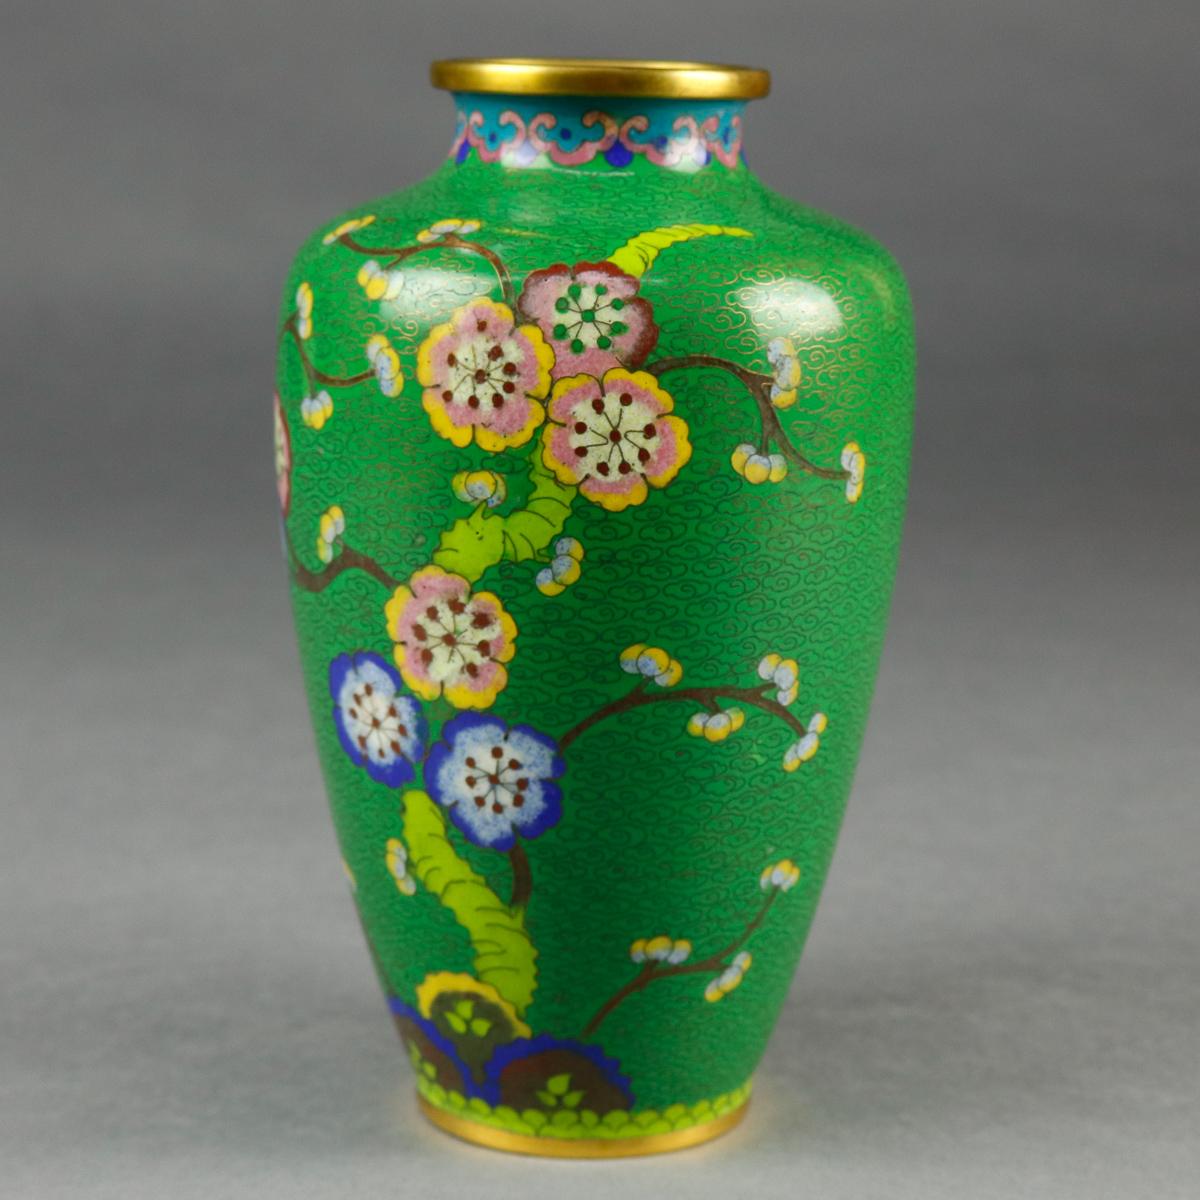 A vintage Chinese cloisonné vase offers brass construction with hand enameled floral decoration with repeating stylized foliate bands at base and collar, circa 1930

***DELIVERY NOTICE – Due to COVID-19 we are employing NO-CONTACT PRACTICES in the